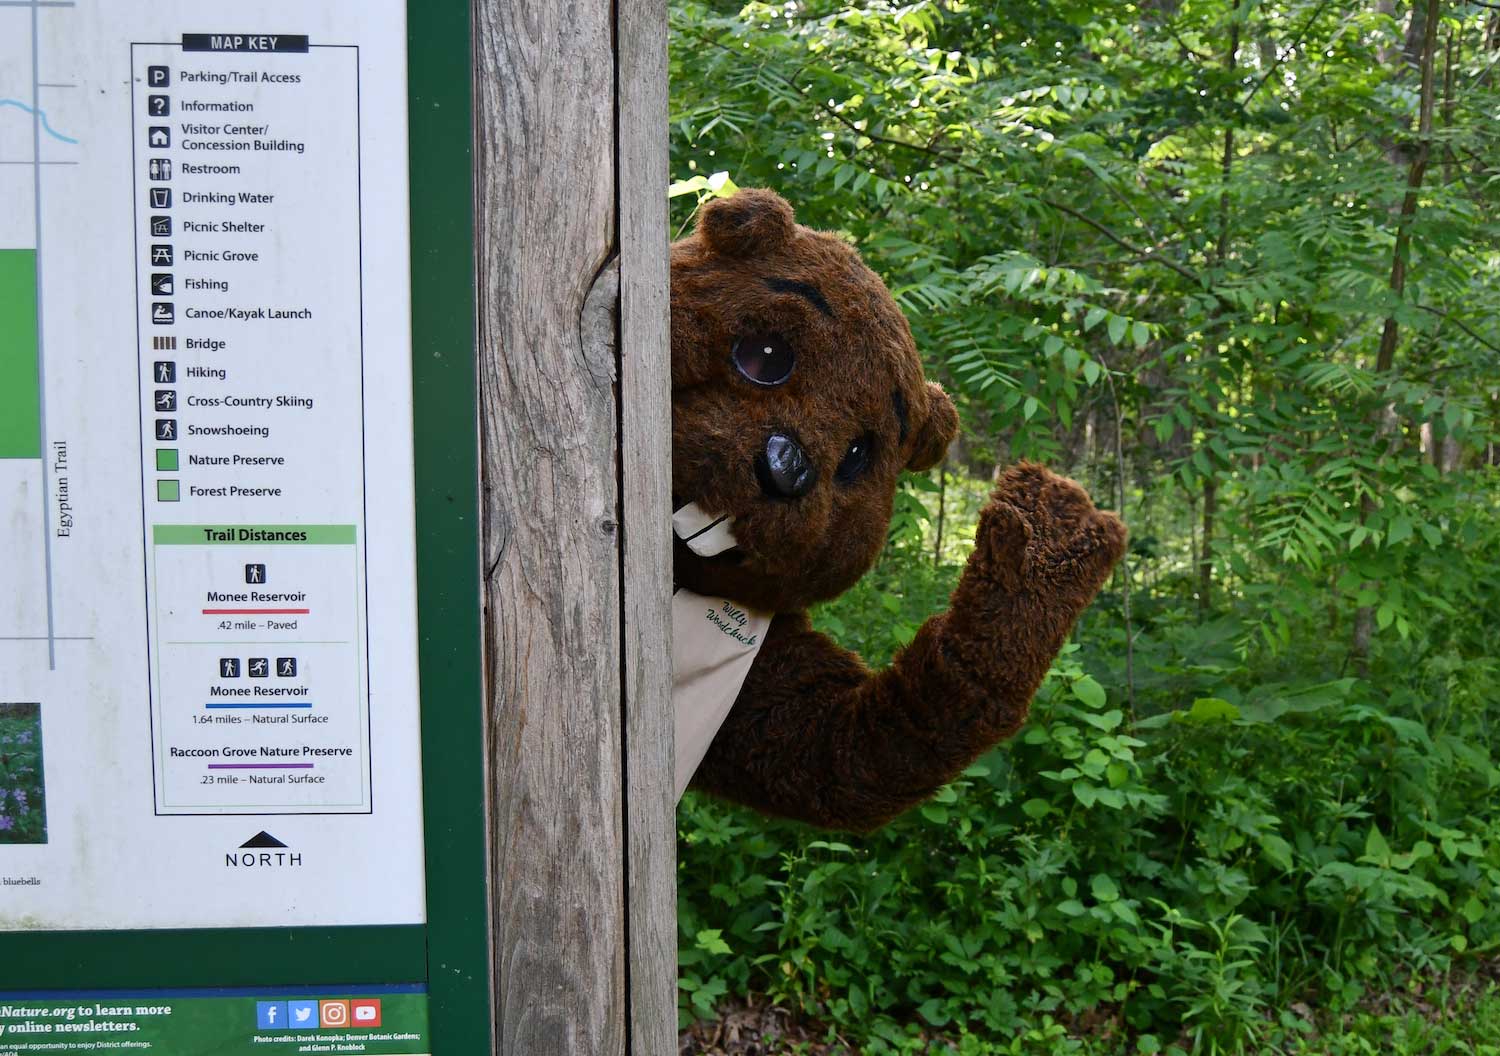 A woodchuck mascot peeking out and waving from behind a sign.